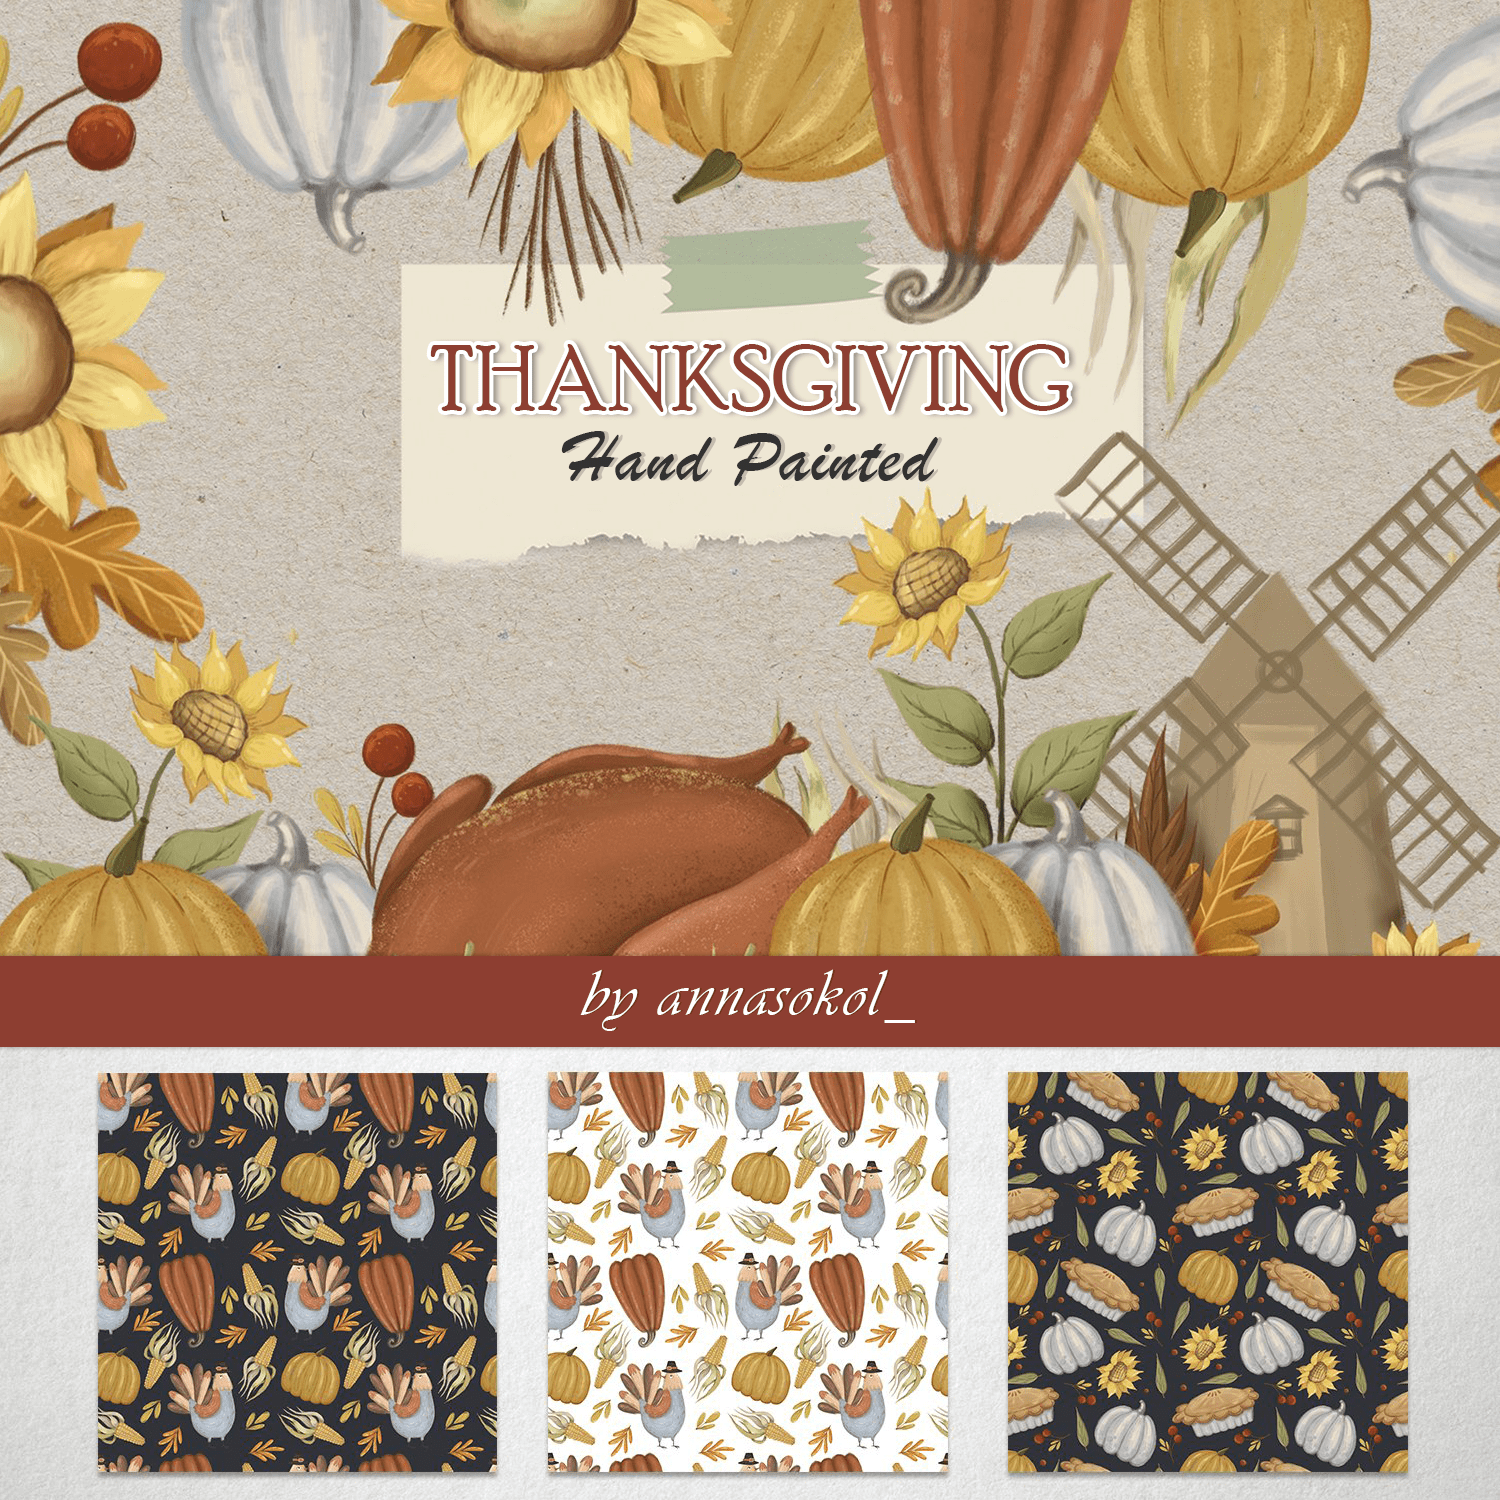 THANKSGIVING: Hand Painted.